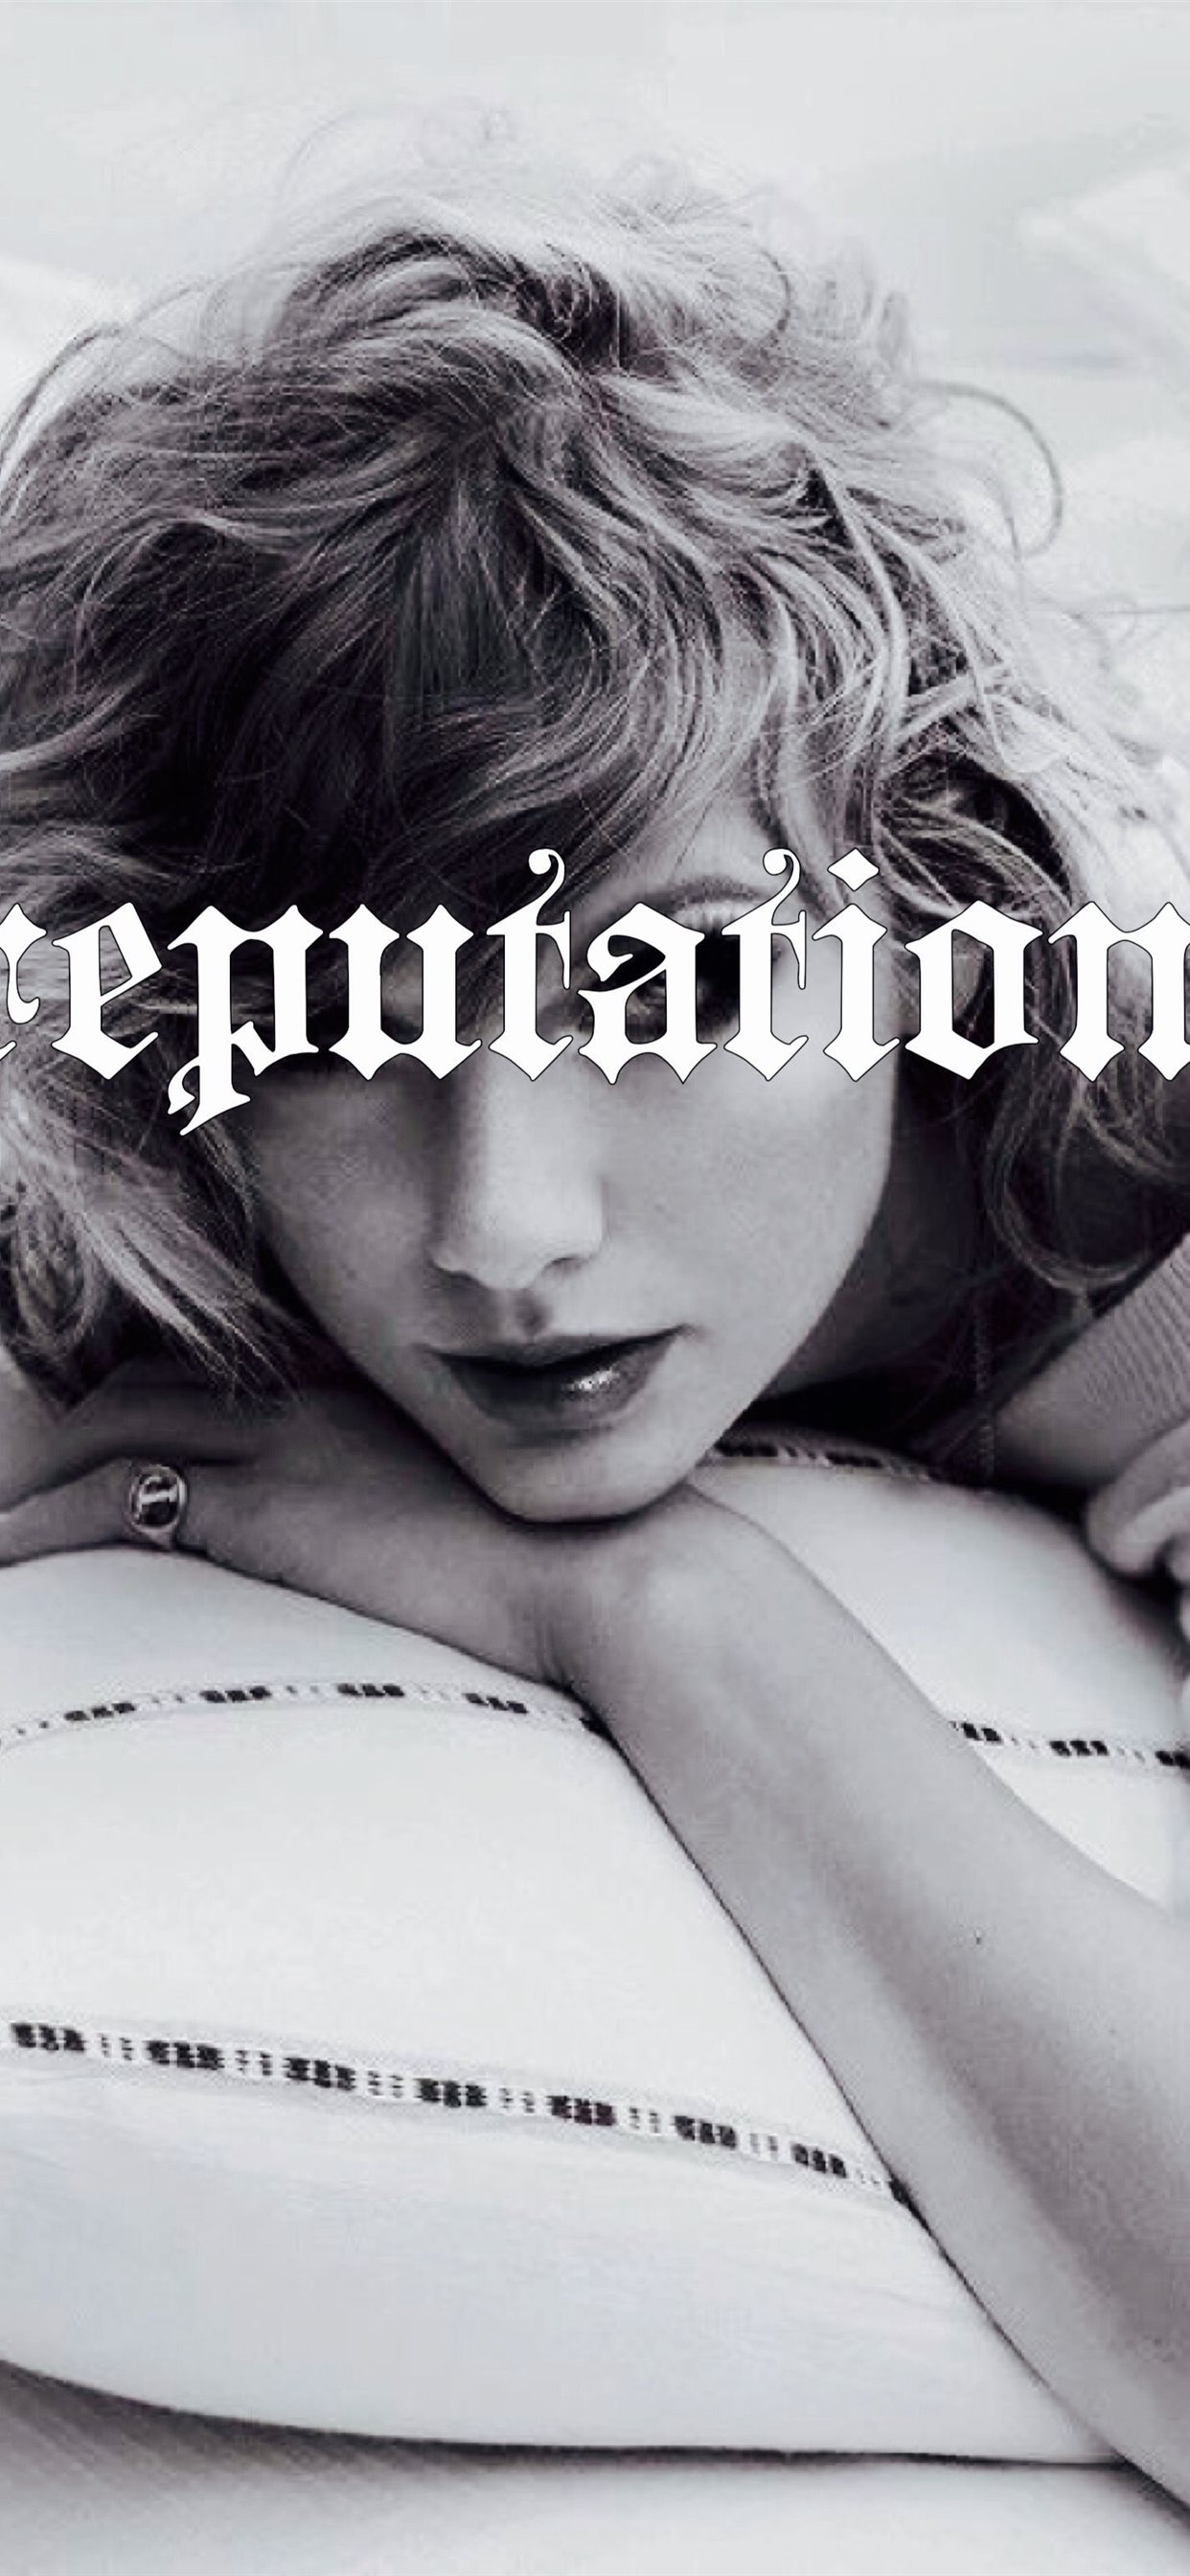 Reputation Taylor Swift Are You Ready For It Ready Iphone Wallpapers Free Download